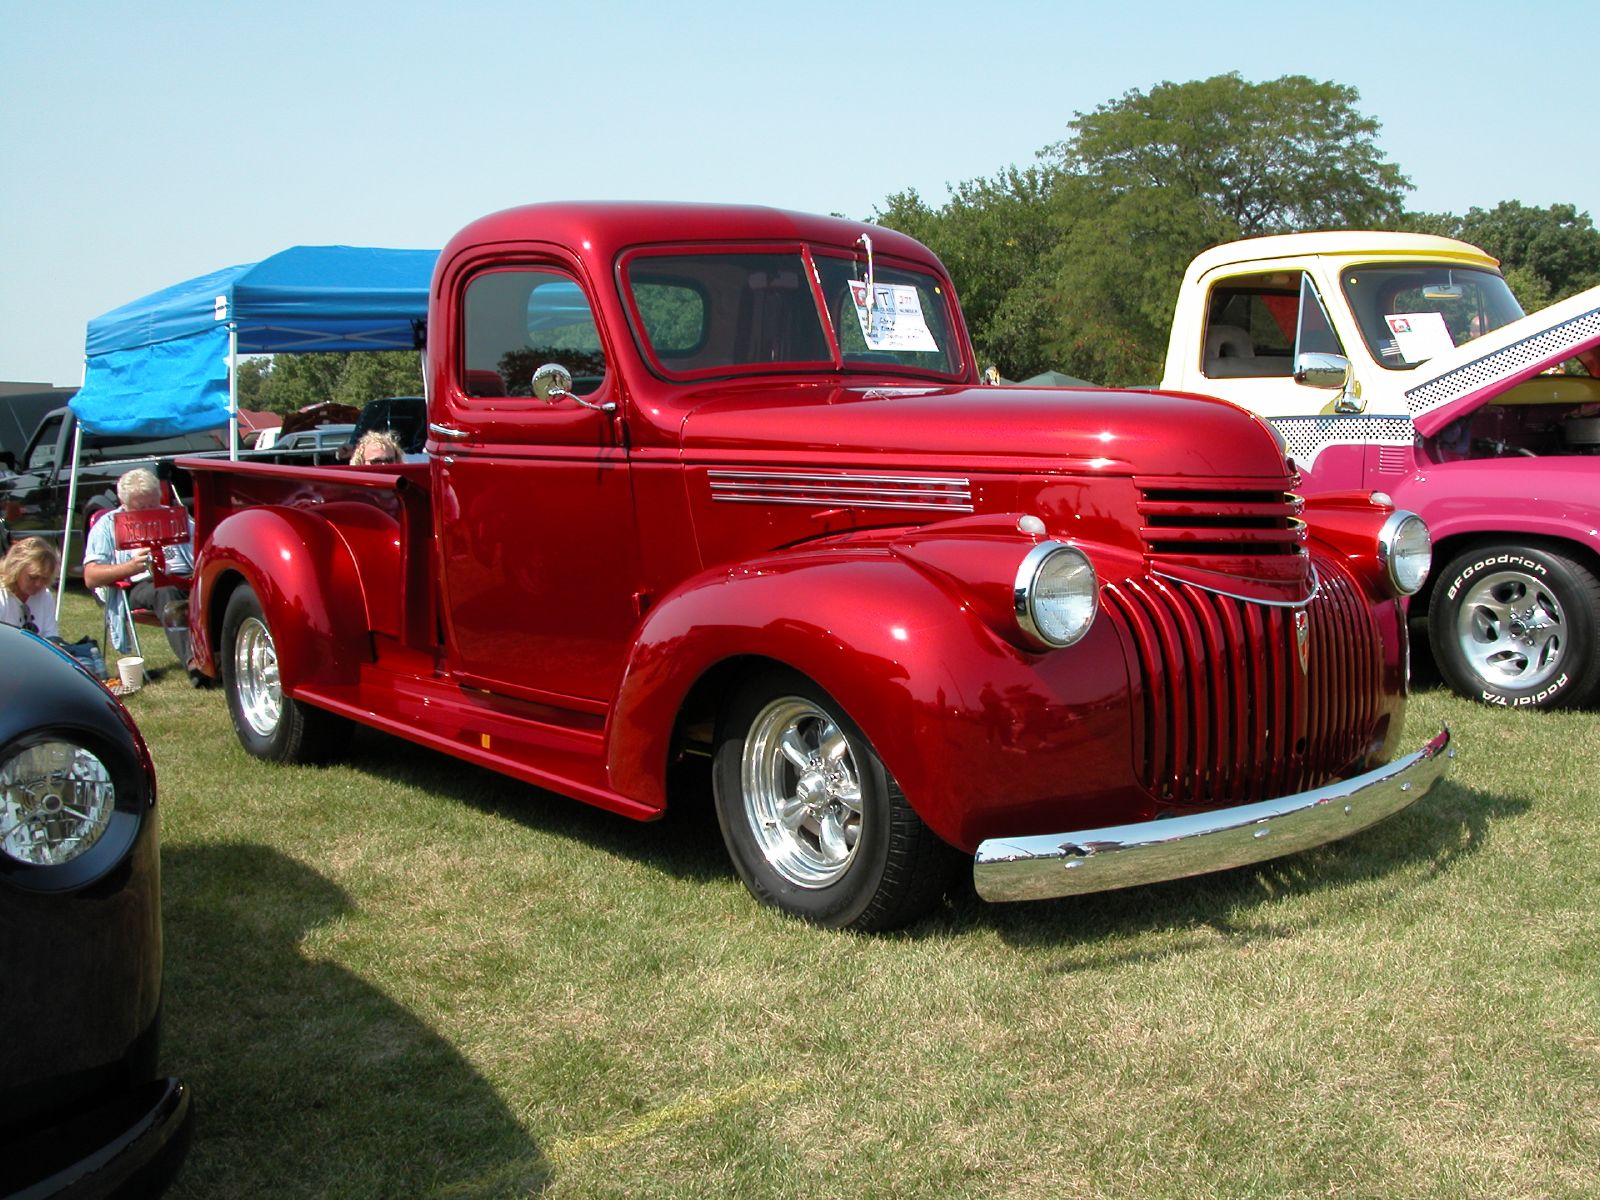 an antique red truck with people in the background